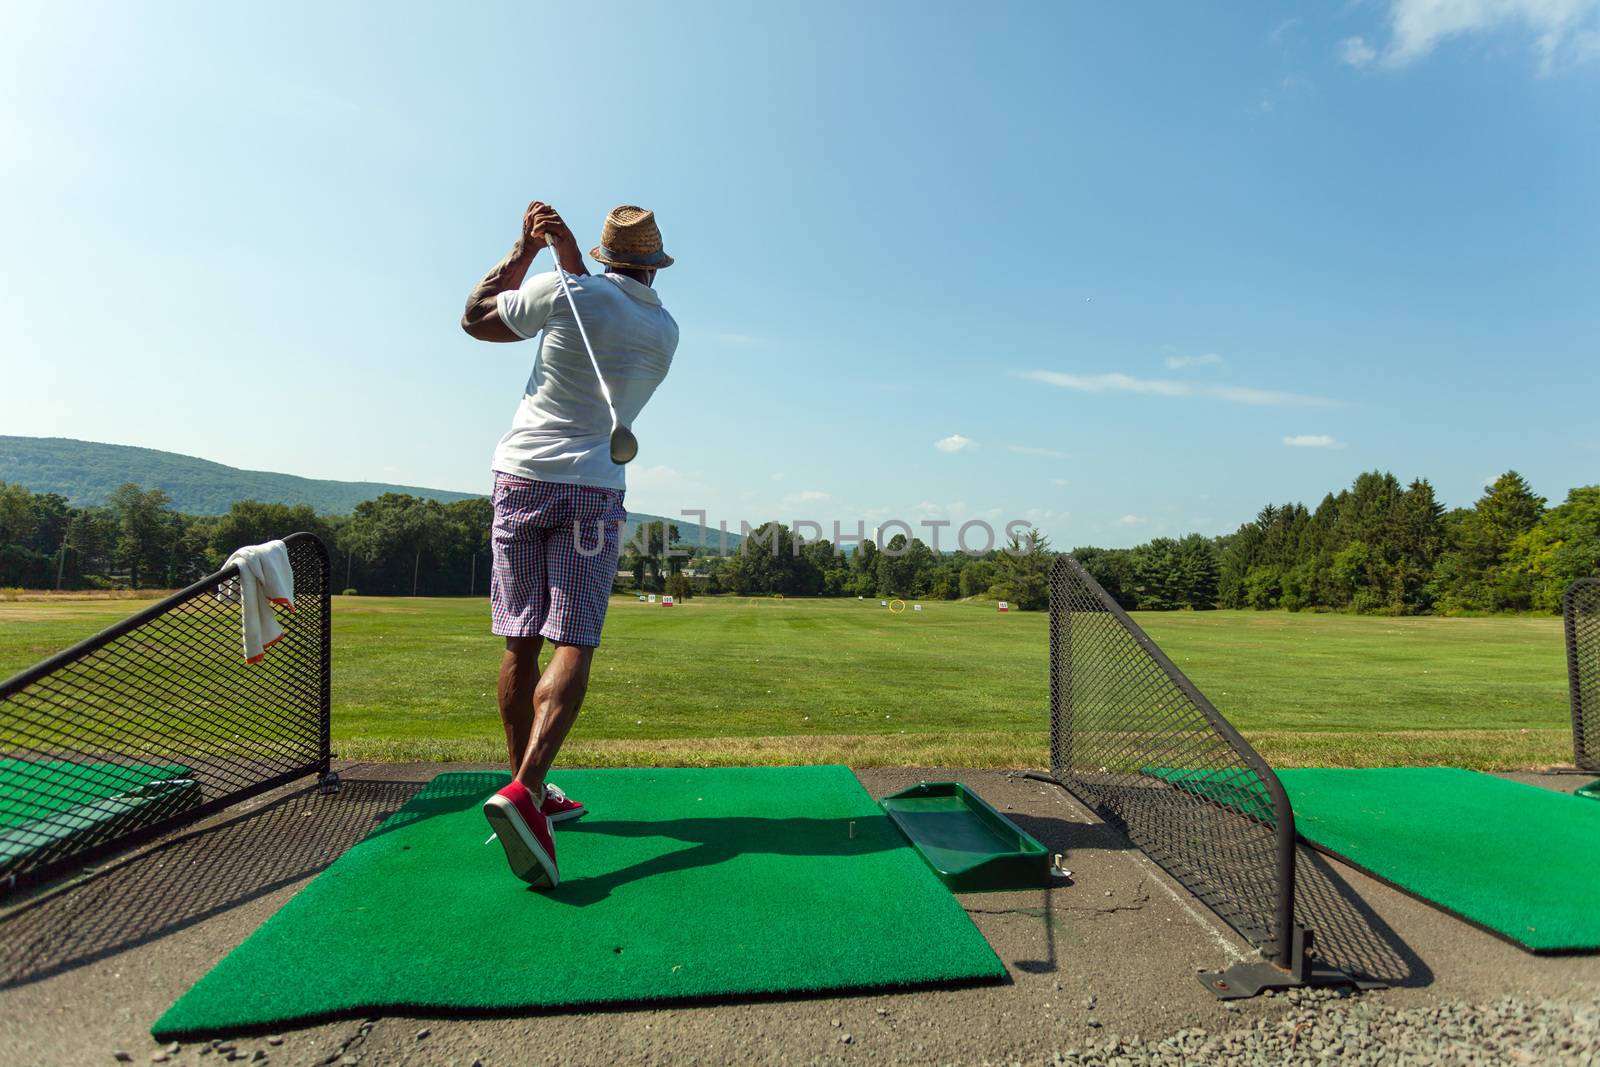 Driving Range Golf Swing by graficallyminded